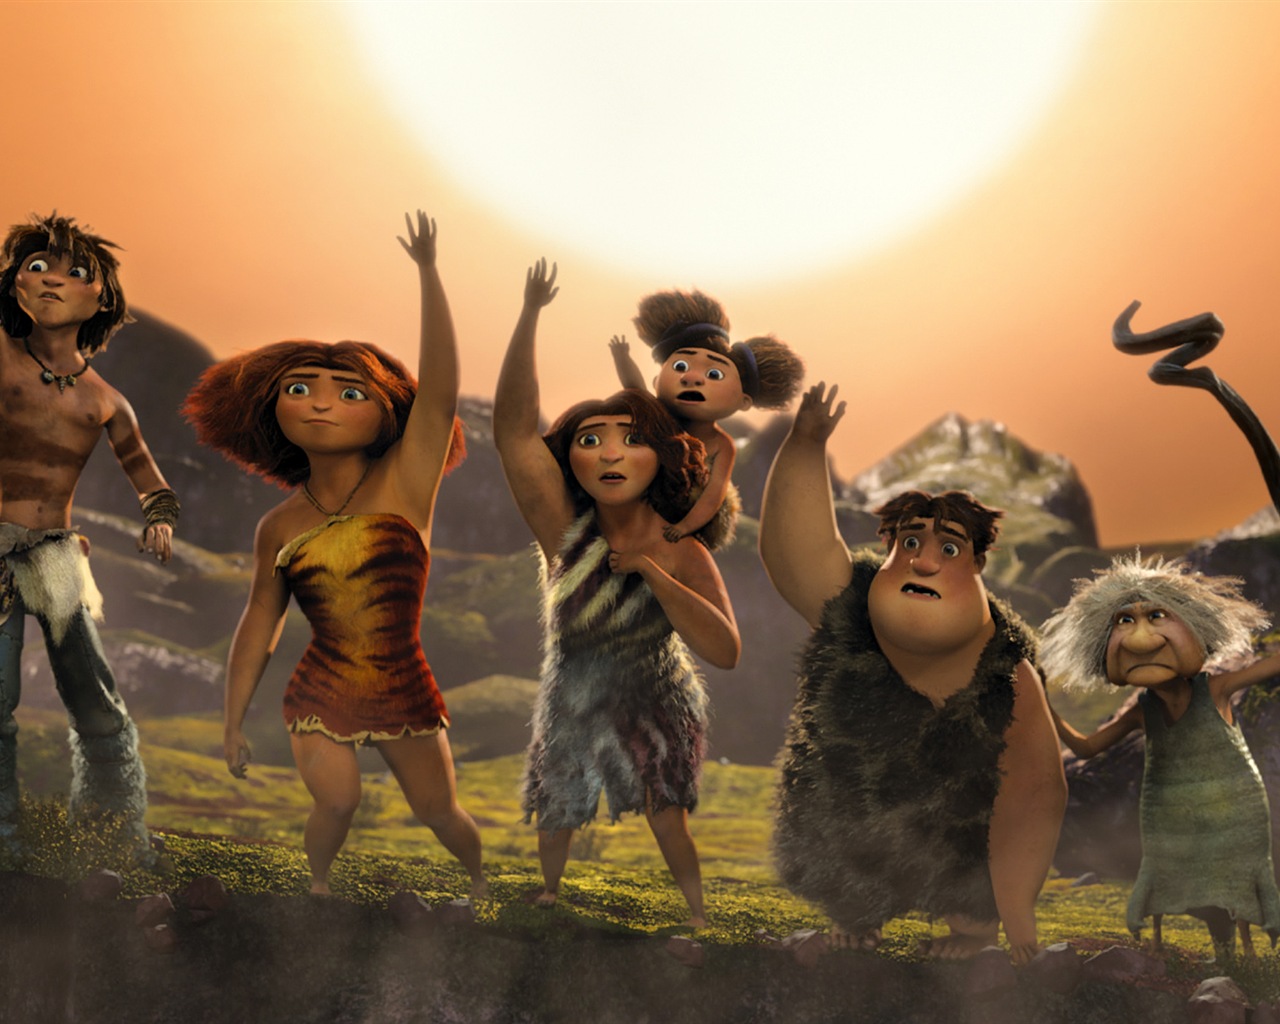 V Croods HD Movie Wallpapers #4 - 1280x1024